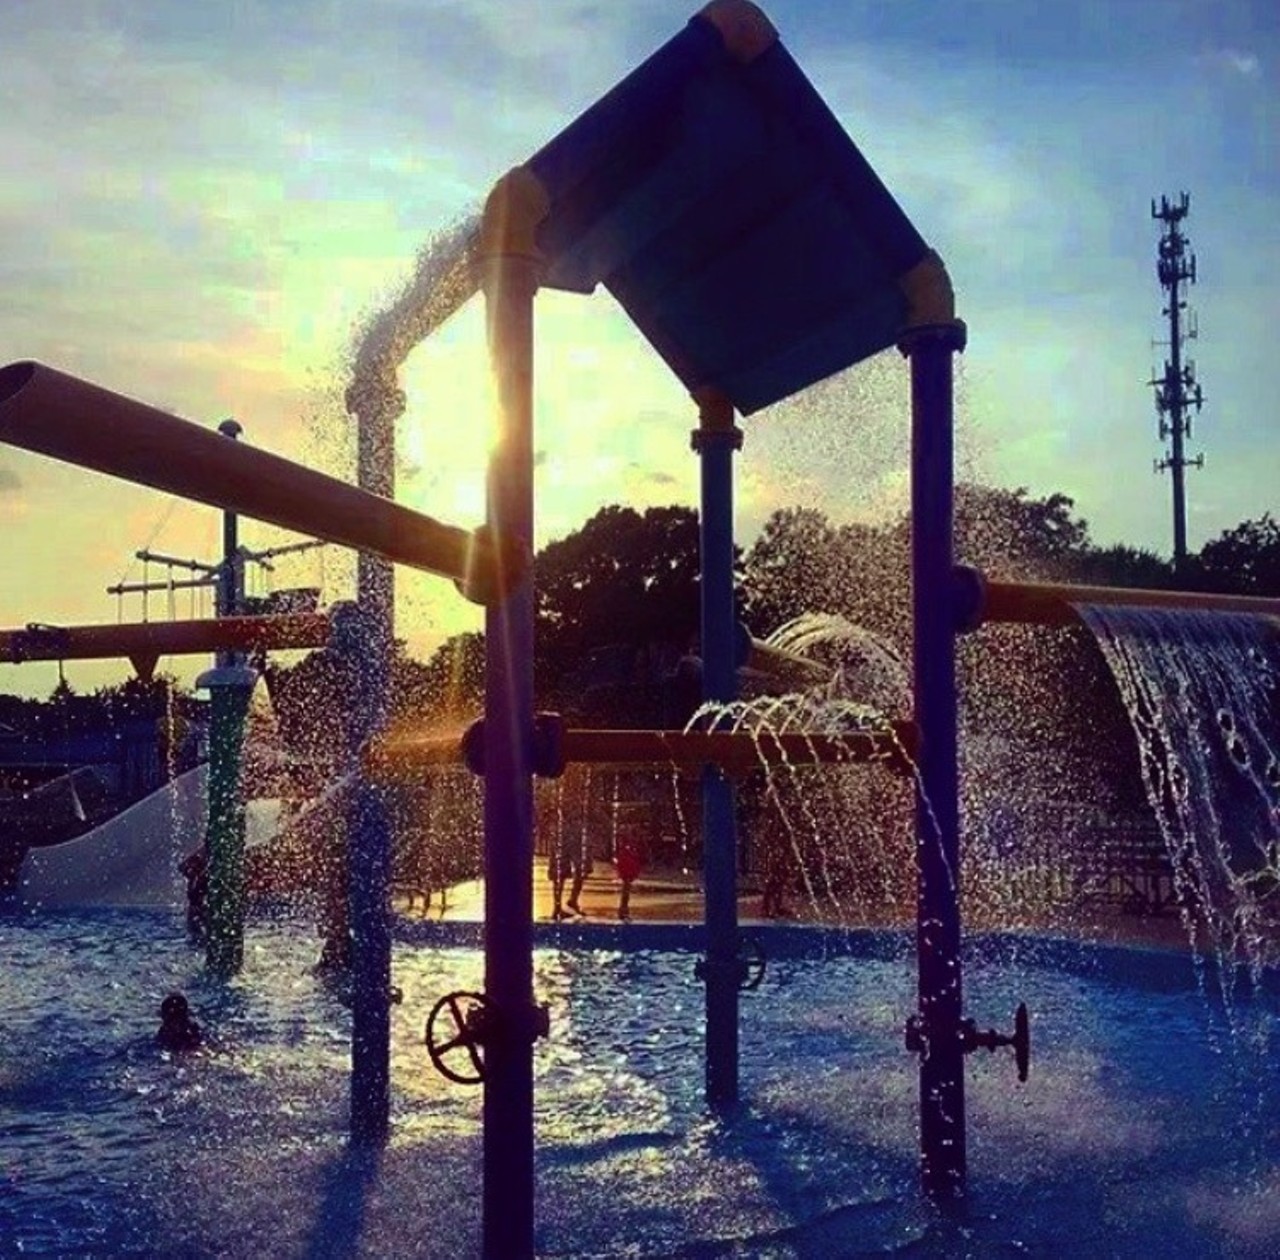 Parma Heights Pool - Splash around at this nearby waterpark at 6200 Pearl Road,
Parma Heights, OH.
(Photo courtesy of Instagram user @Scorrao)